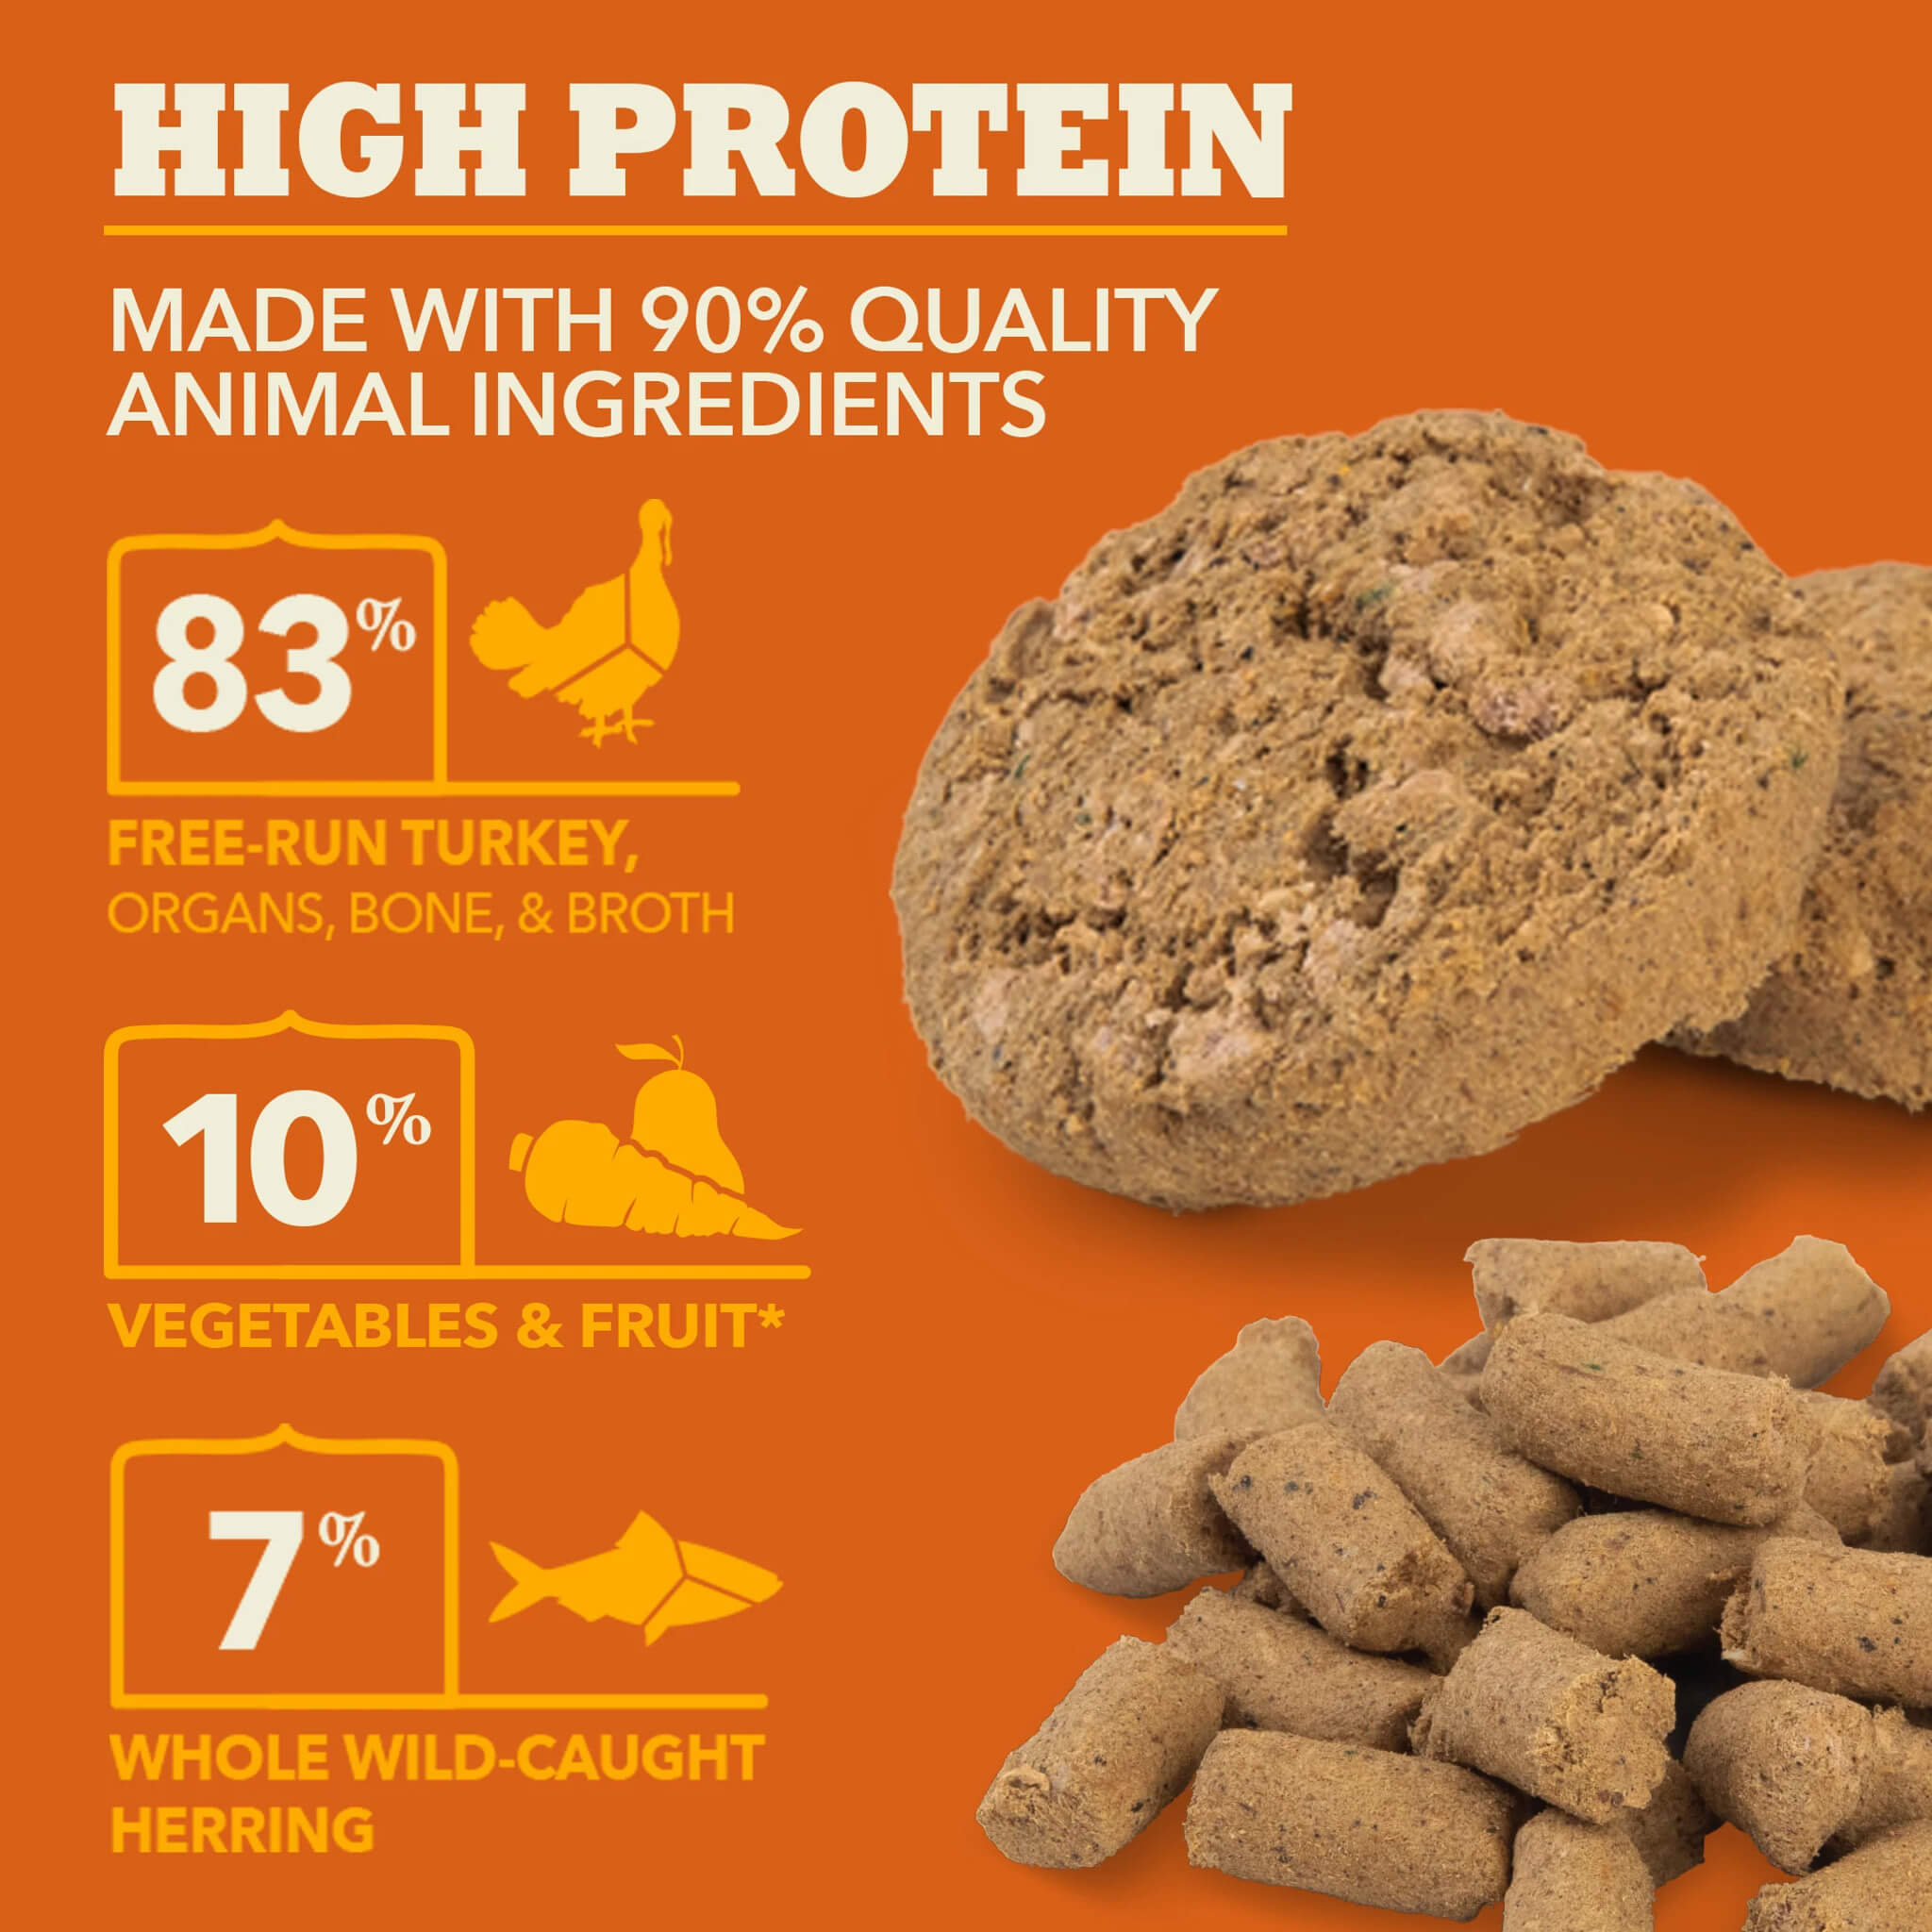 High protein - made with 90% quality animal ingredients